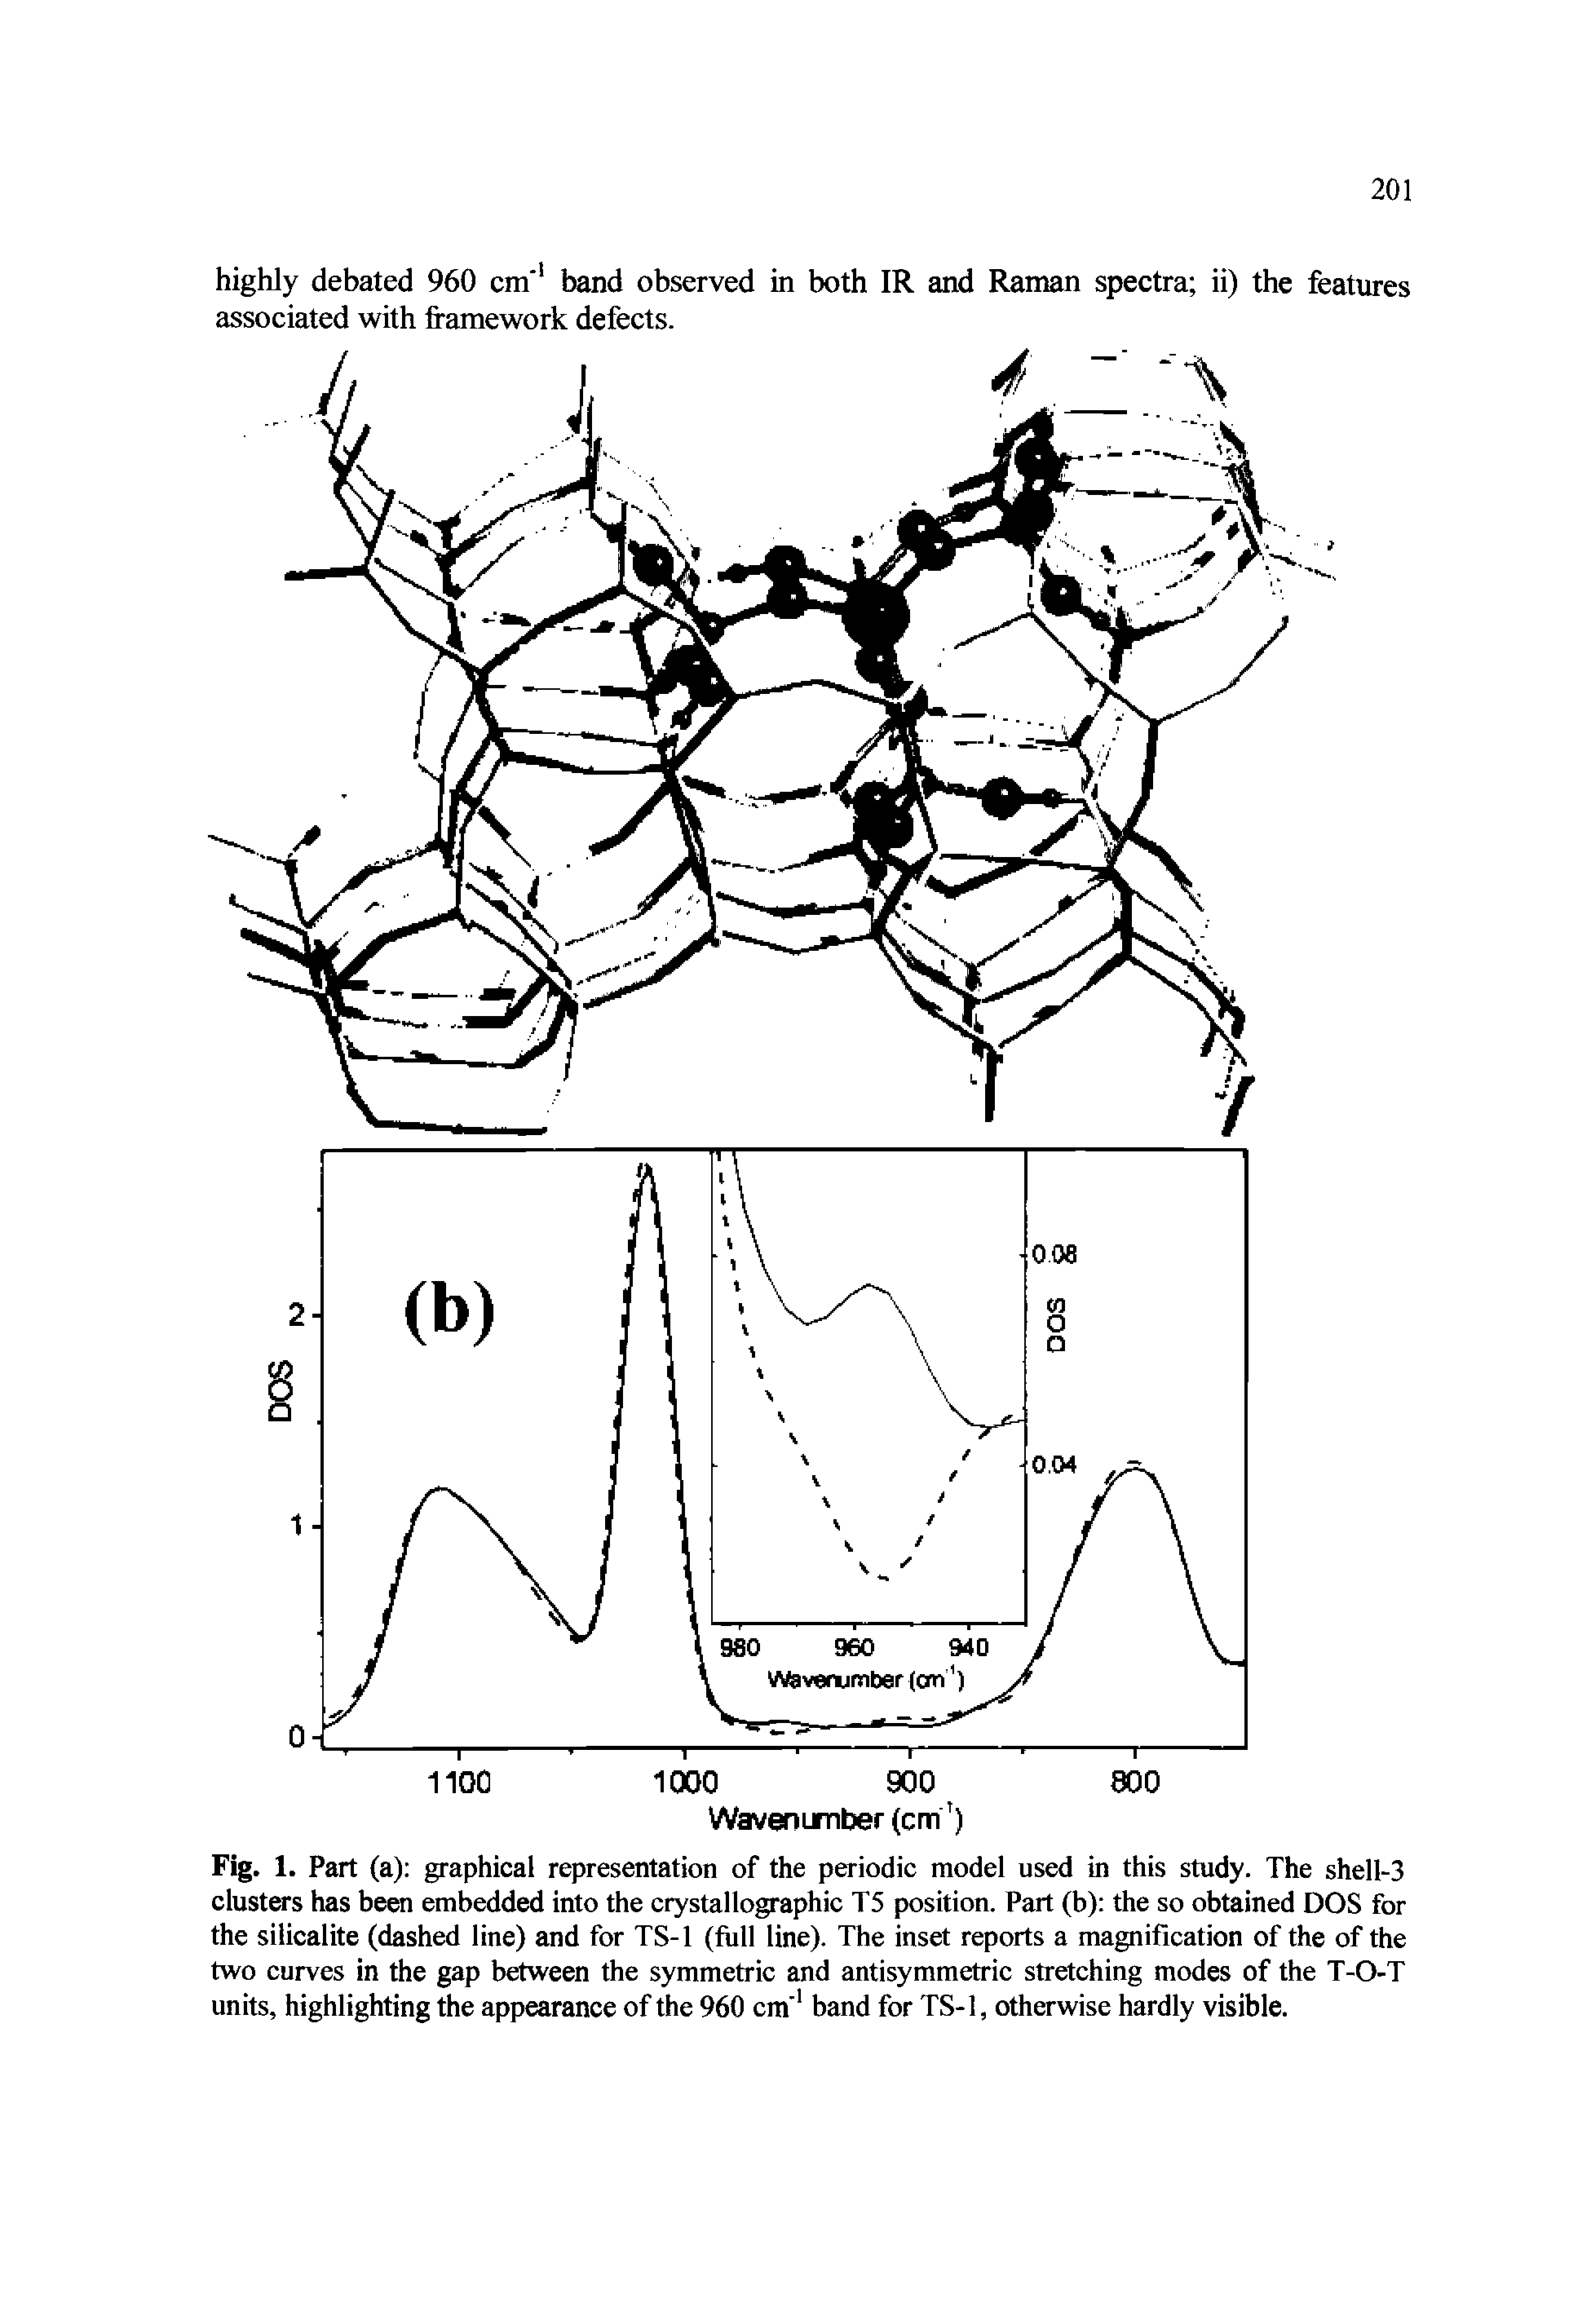 Fig. 1. Part (a) graphical representation of the periodic model used in this study. The shell-3 clusters has been embedded into the crystallographic T5 position. Part (b) the so obtained DOS for the silicalite (dashed line) and for TS-1 (full line). The inset reports a magnification of the of the two curves in the gap between the symmetric and antisymmetric stretching modes of the T-O-T units, highlighting the appearance of the 960 cm band for TS-1, otherwise hardly visible.